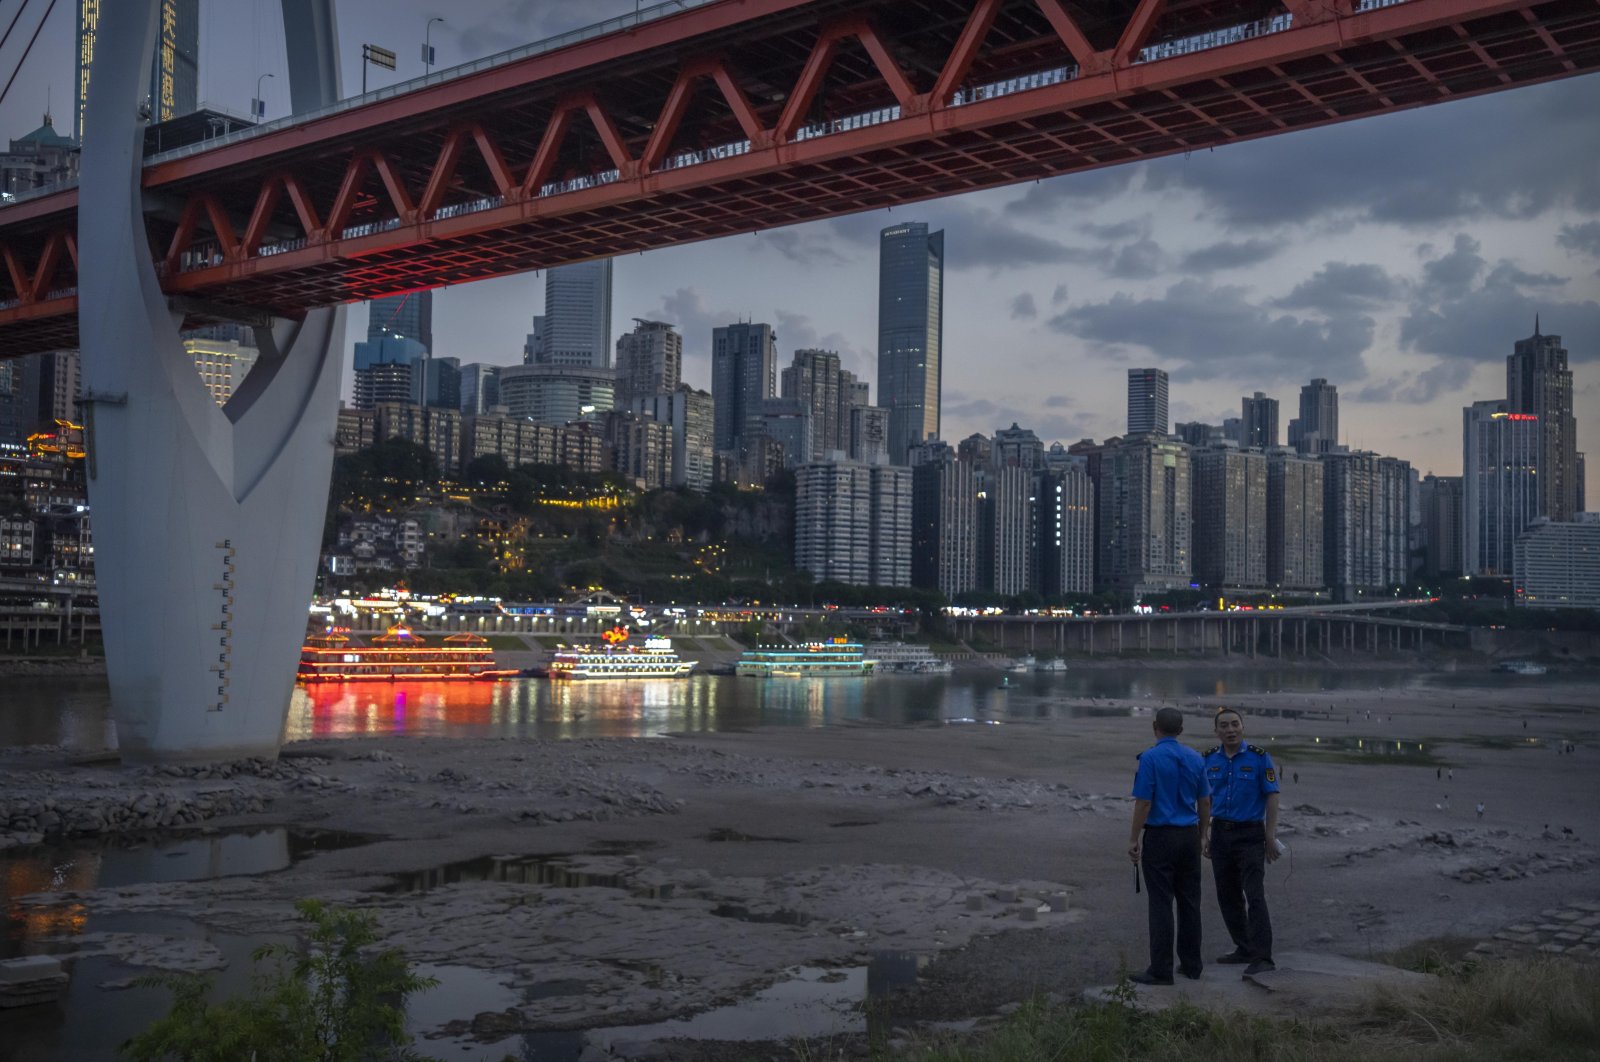 Security officers stand on a hillside, Chongqing, southwestern China, Aug. 20, 2022. (AP Photo)